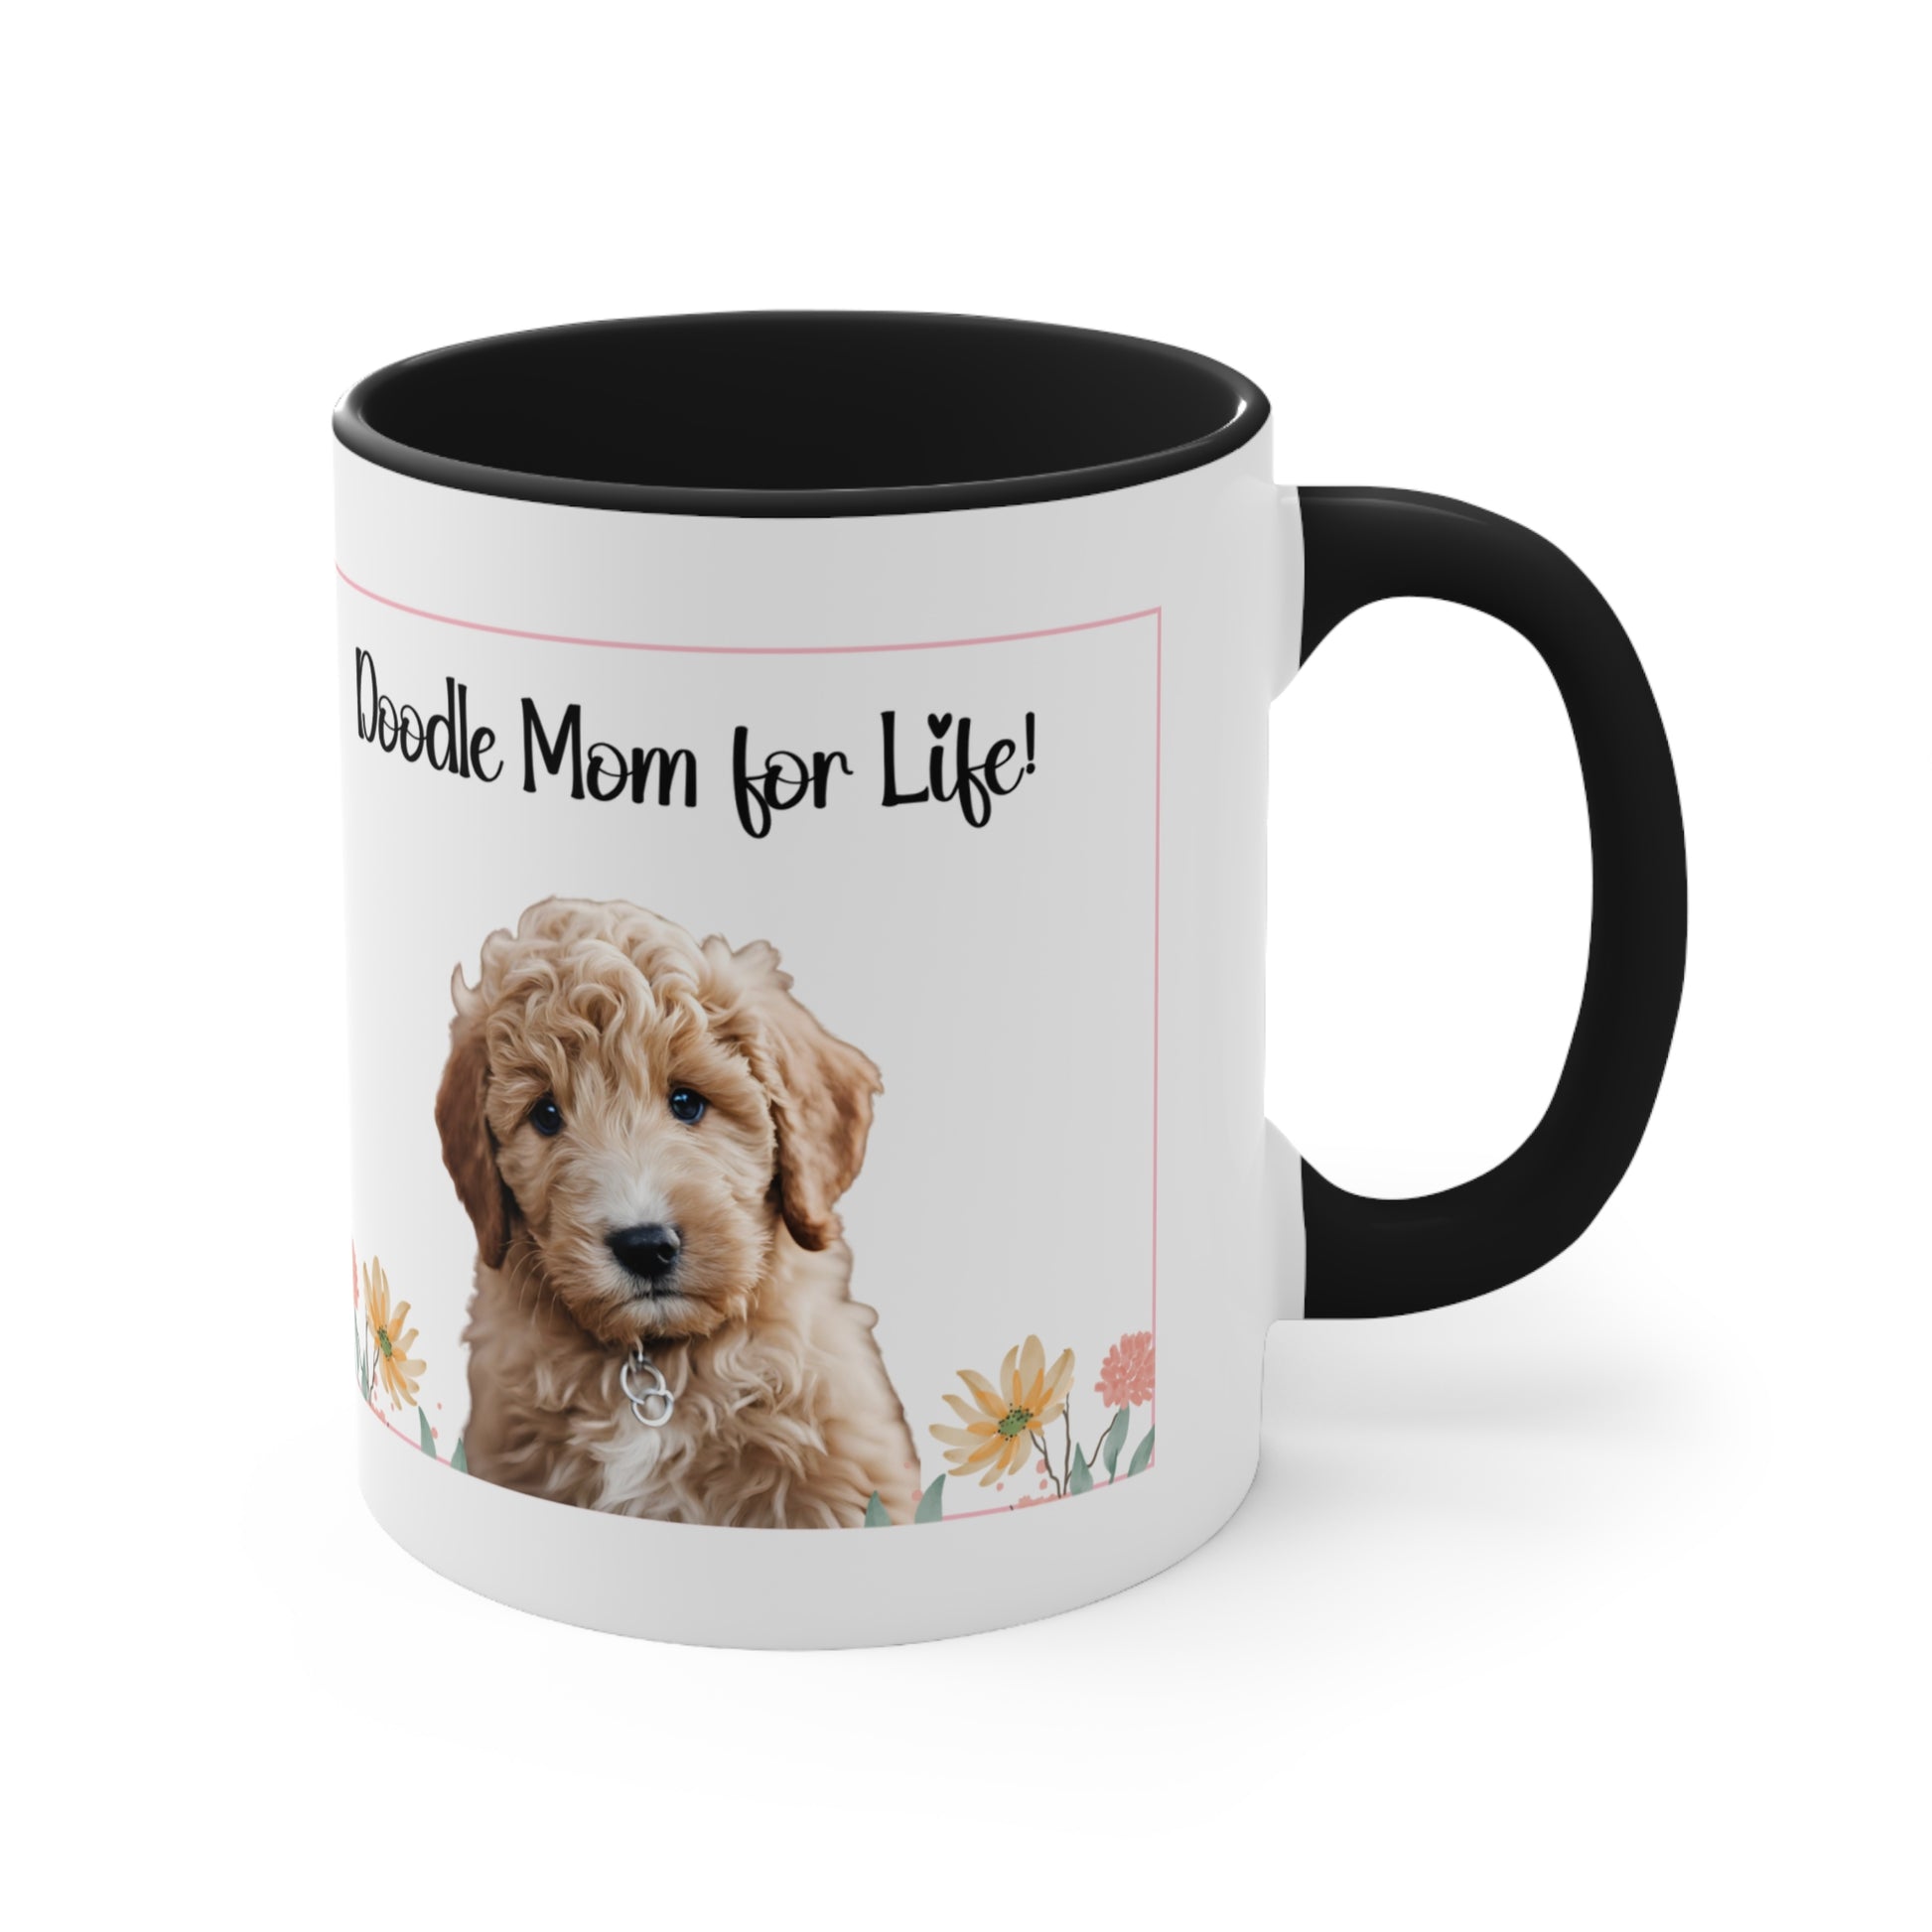 Golden doodle coffee mug, 11 oz hor gift or self, front view in black.